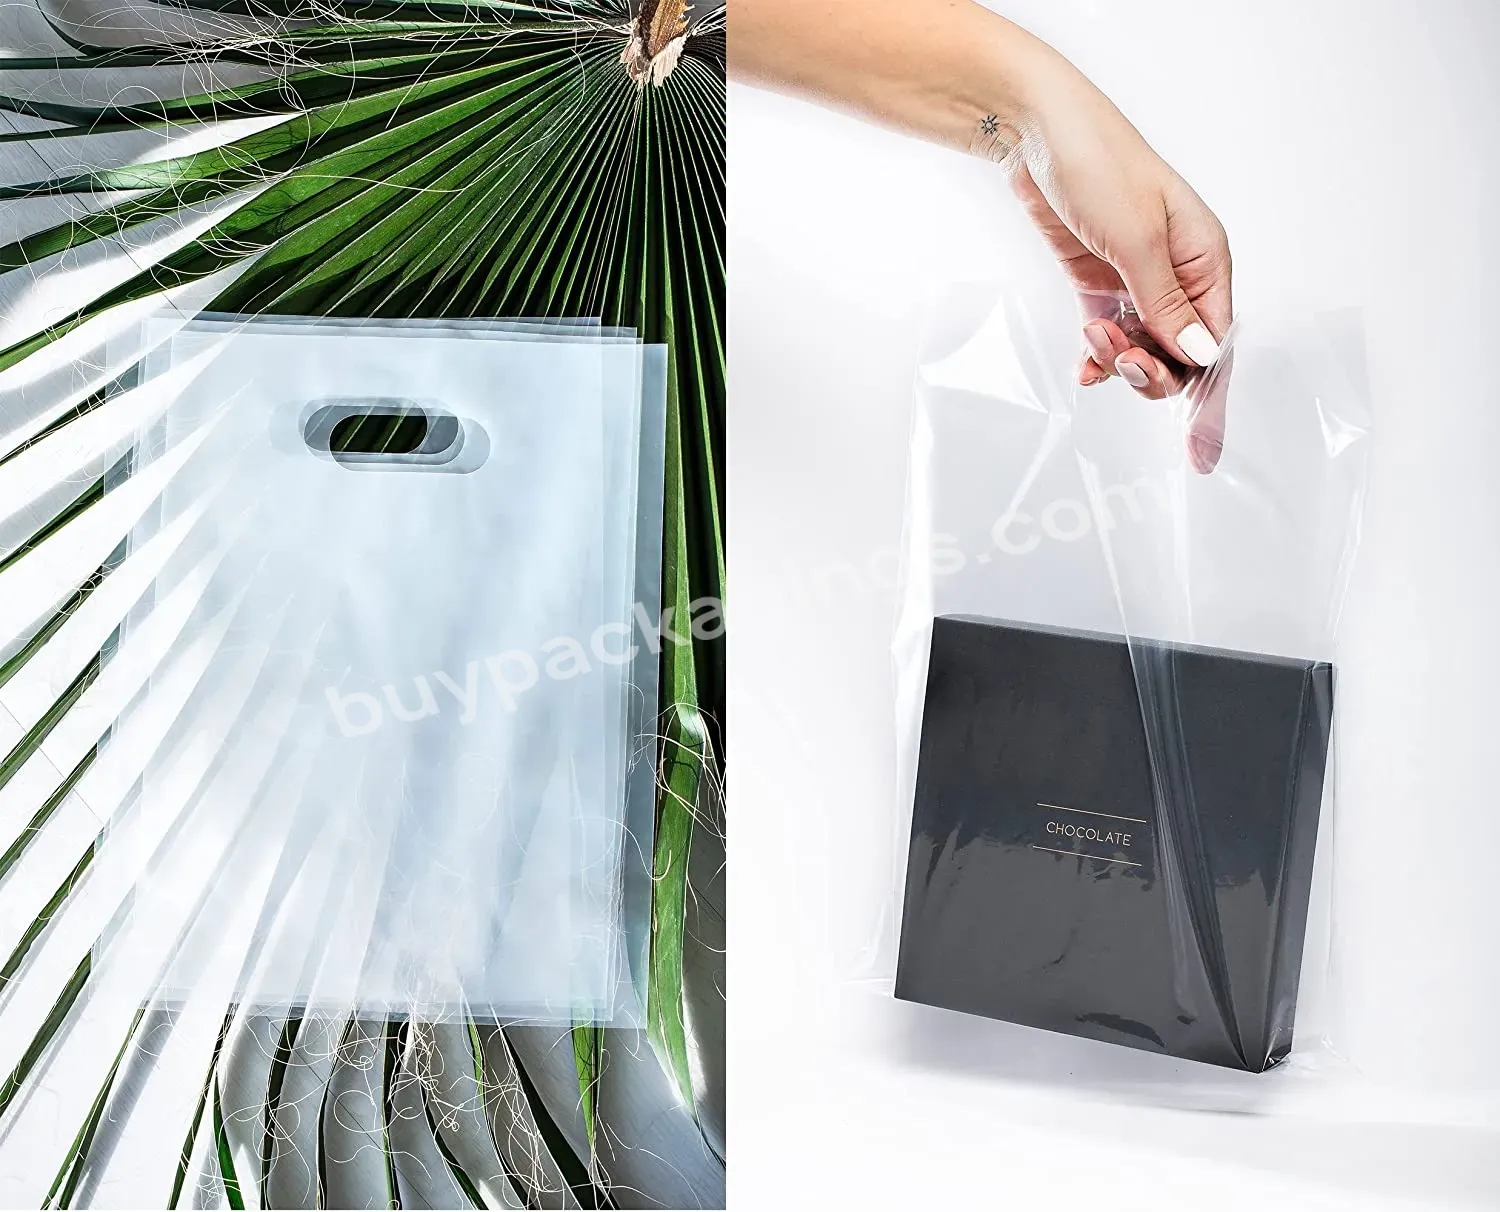 Clear Ldpe Solid Handle Bag Merchandise Bag With Die Cut Handles For Shopping - Buy Clear Ldpe Bag,Merchandise Bag With Die Cut Handles,Solid Handle Bag For Shopping.